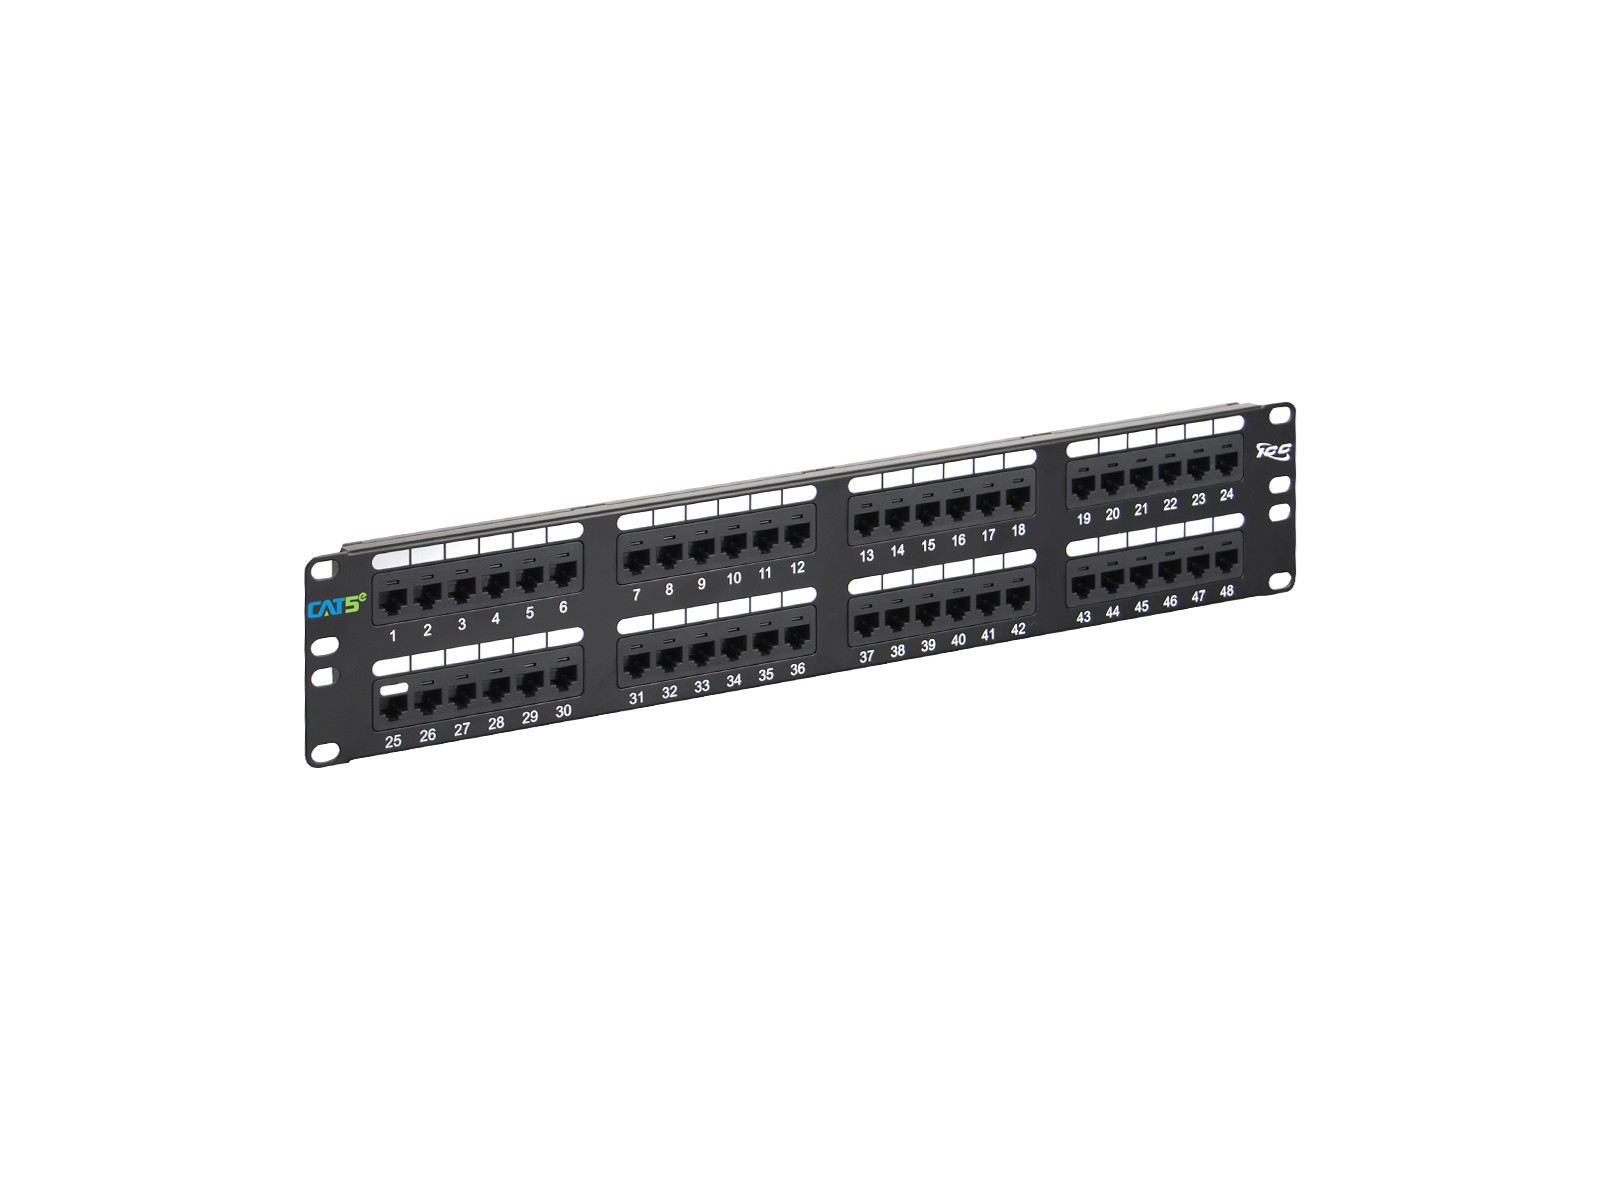 Patch Panel Wiring Diagram Cat 5e Patch Panel 48 Port 2 Rms Of Patch Panel Wiring Diagram